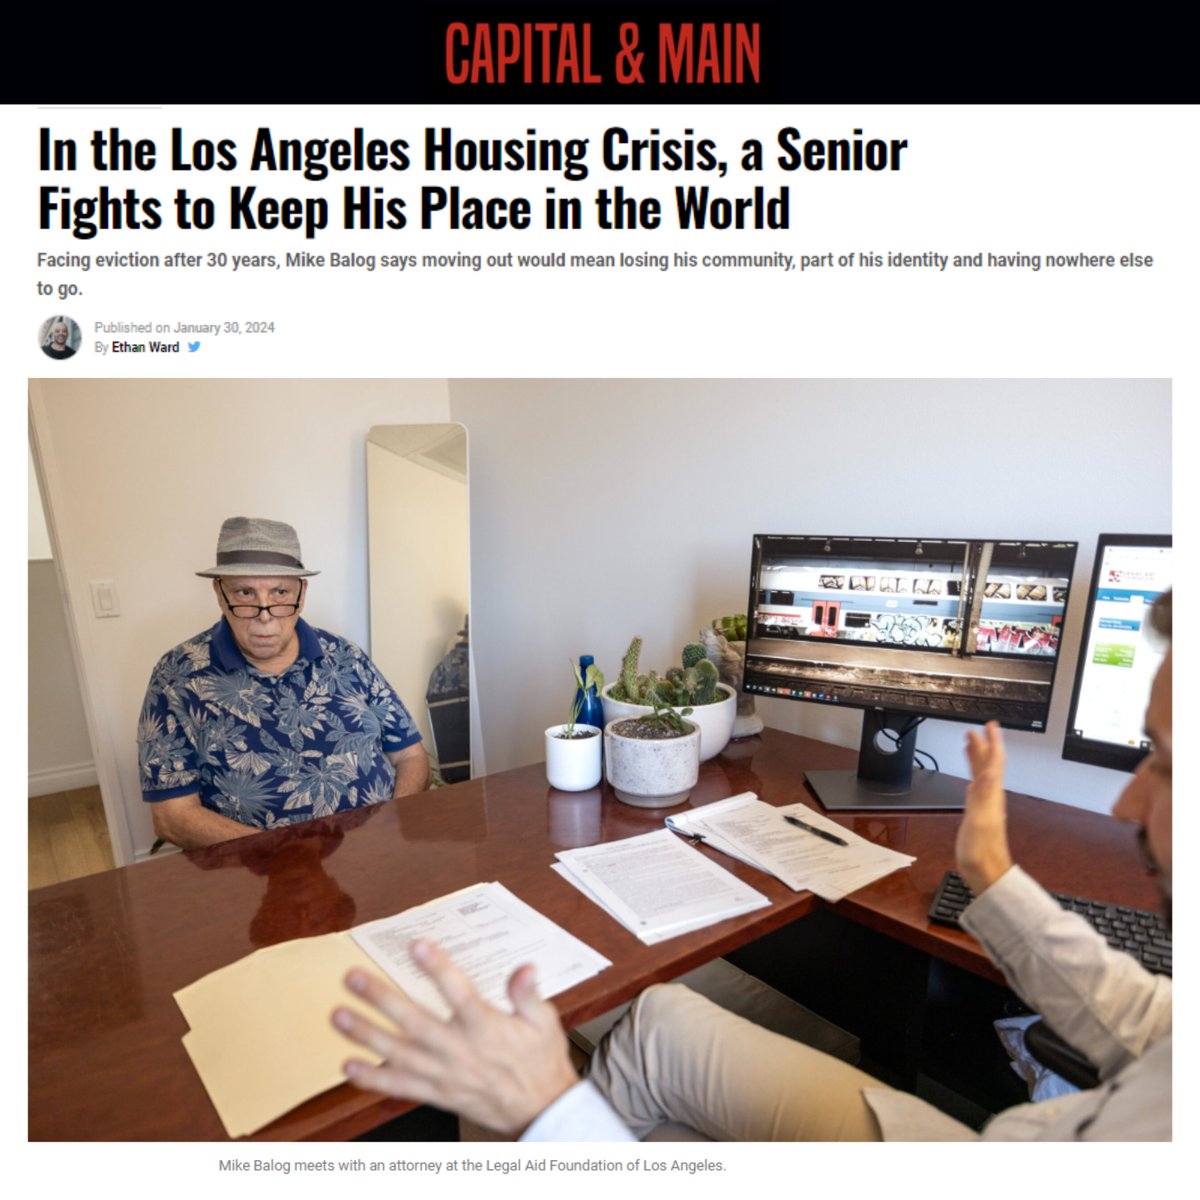 Mike Balog's story represents the struggle of many Los Angeles renters since the end of pandemic renter protections: #Evictions are on the rise, and with steep rental costs, many seniors have nowhere to go. From @iamethanward at @capitalandmain: capitalandmain.com/in-the-los-ang…